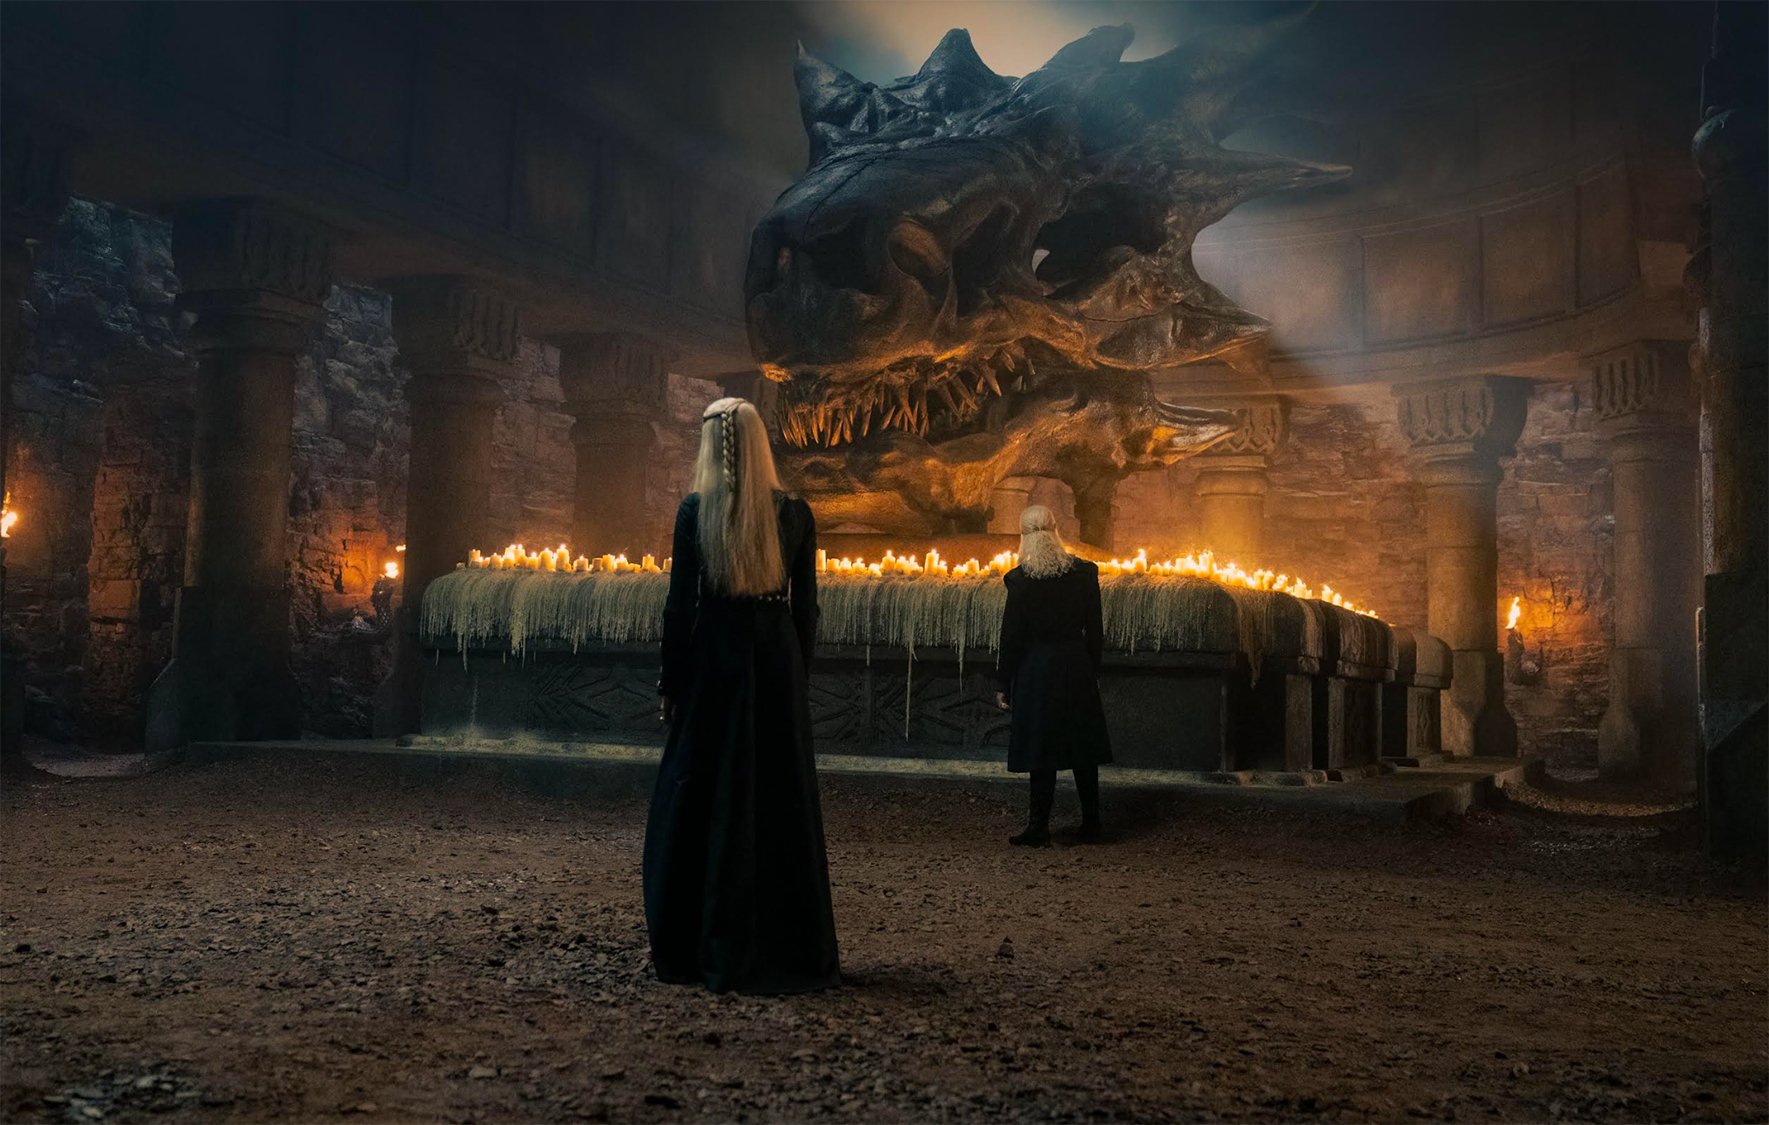 House Of The Dragon Is A Huge Success: It's HBO's Biggest Premiere - DSF Antique Jewelry